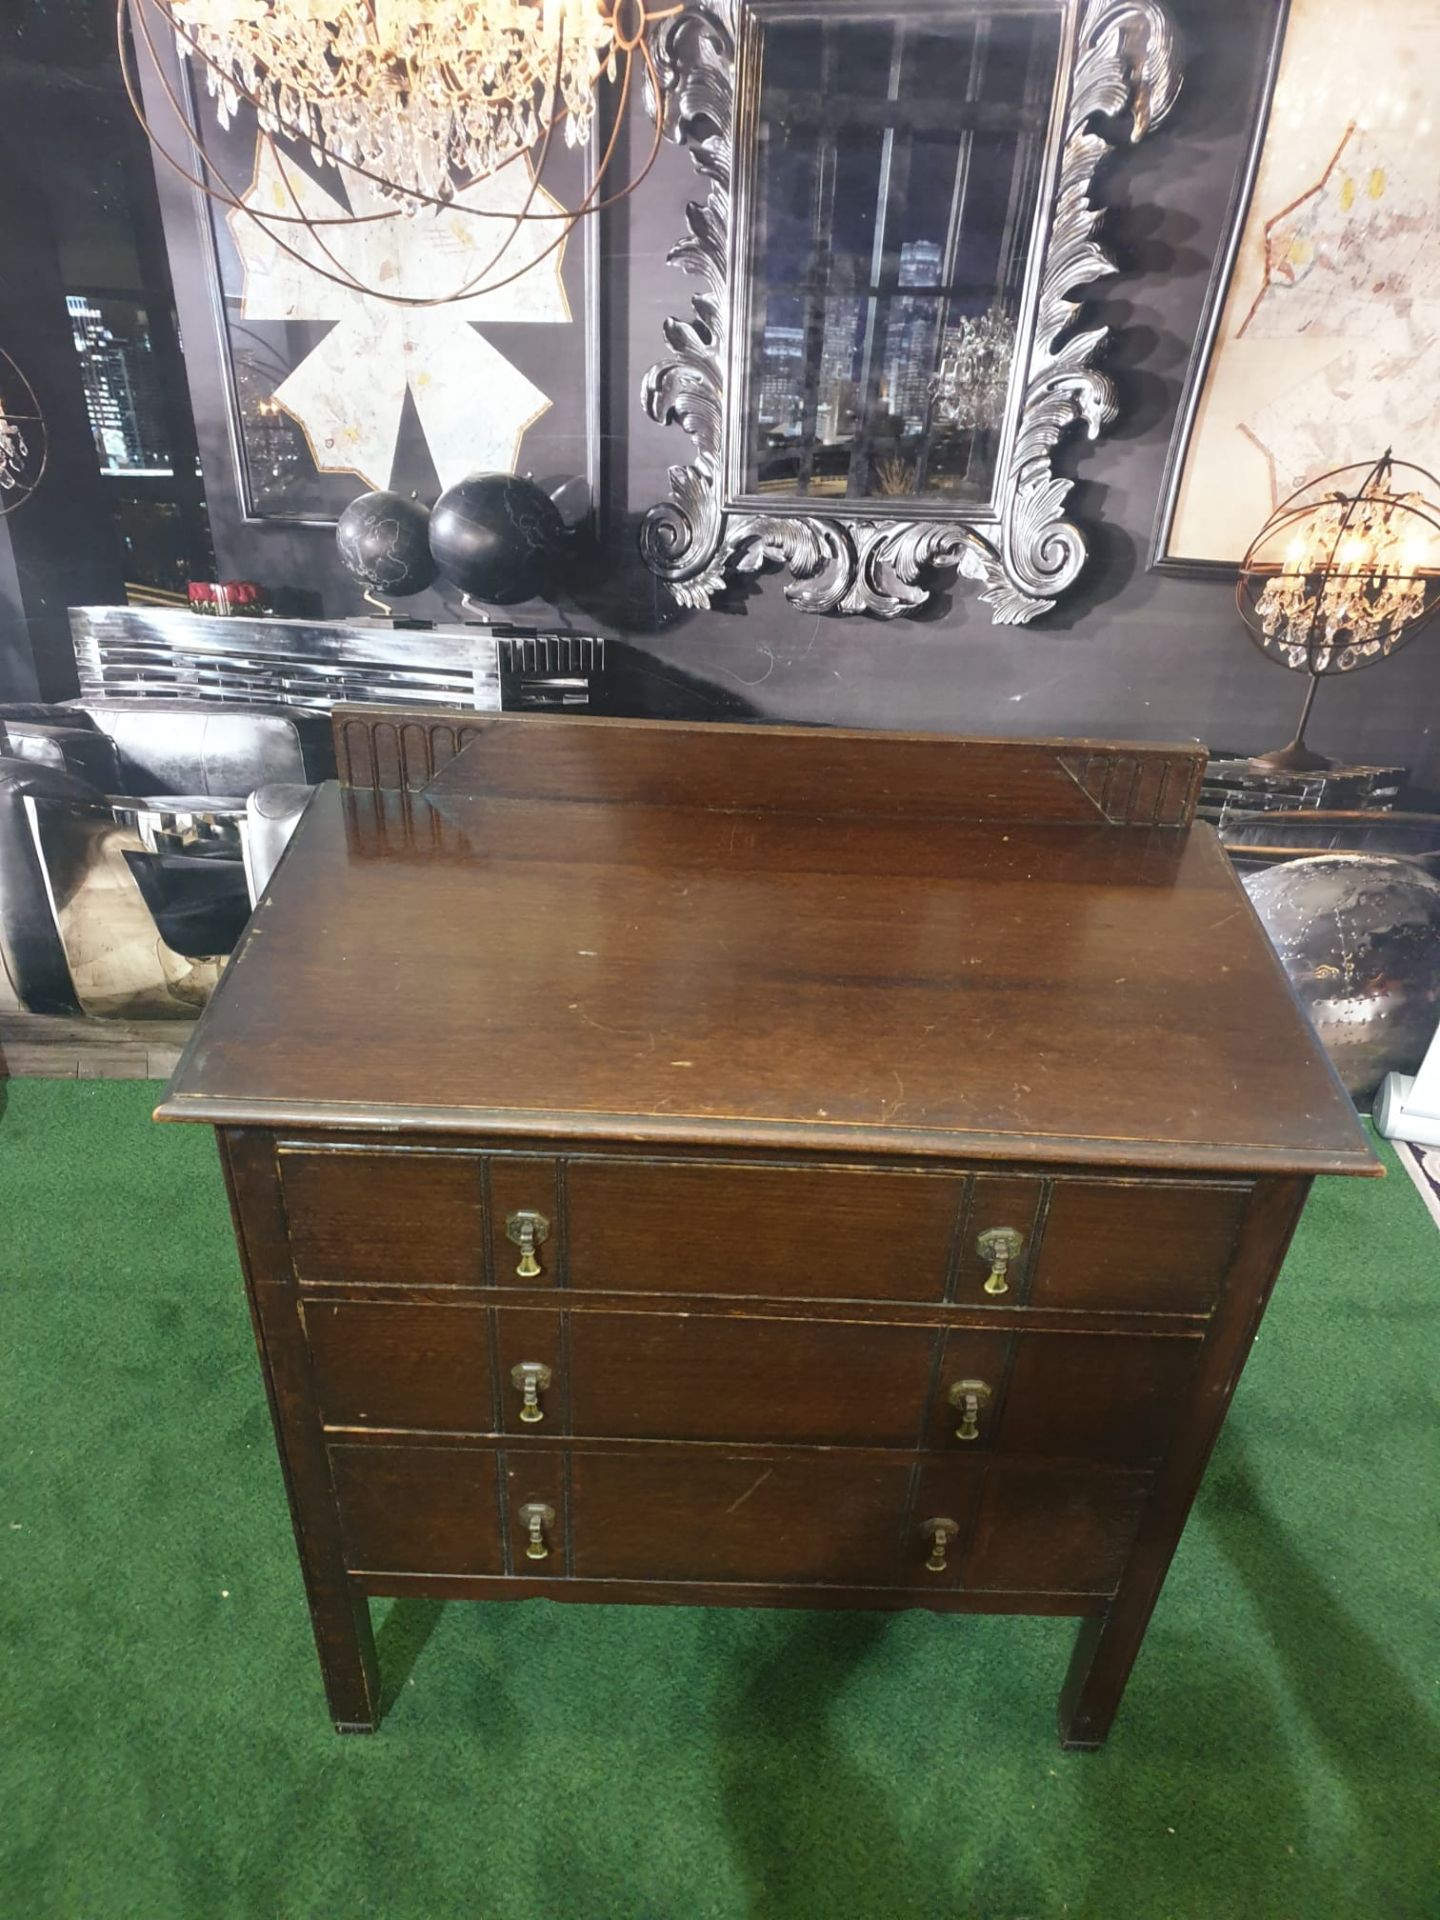 Late Georgian Mahogany Chest Of Drawers three Drawer chest 84W x 46D x 95H - Image 2 of 5